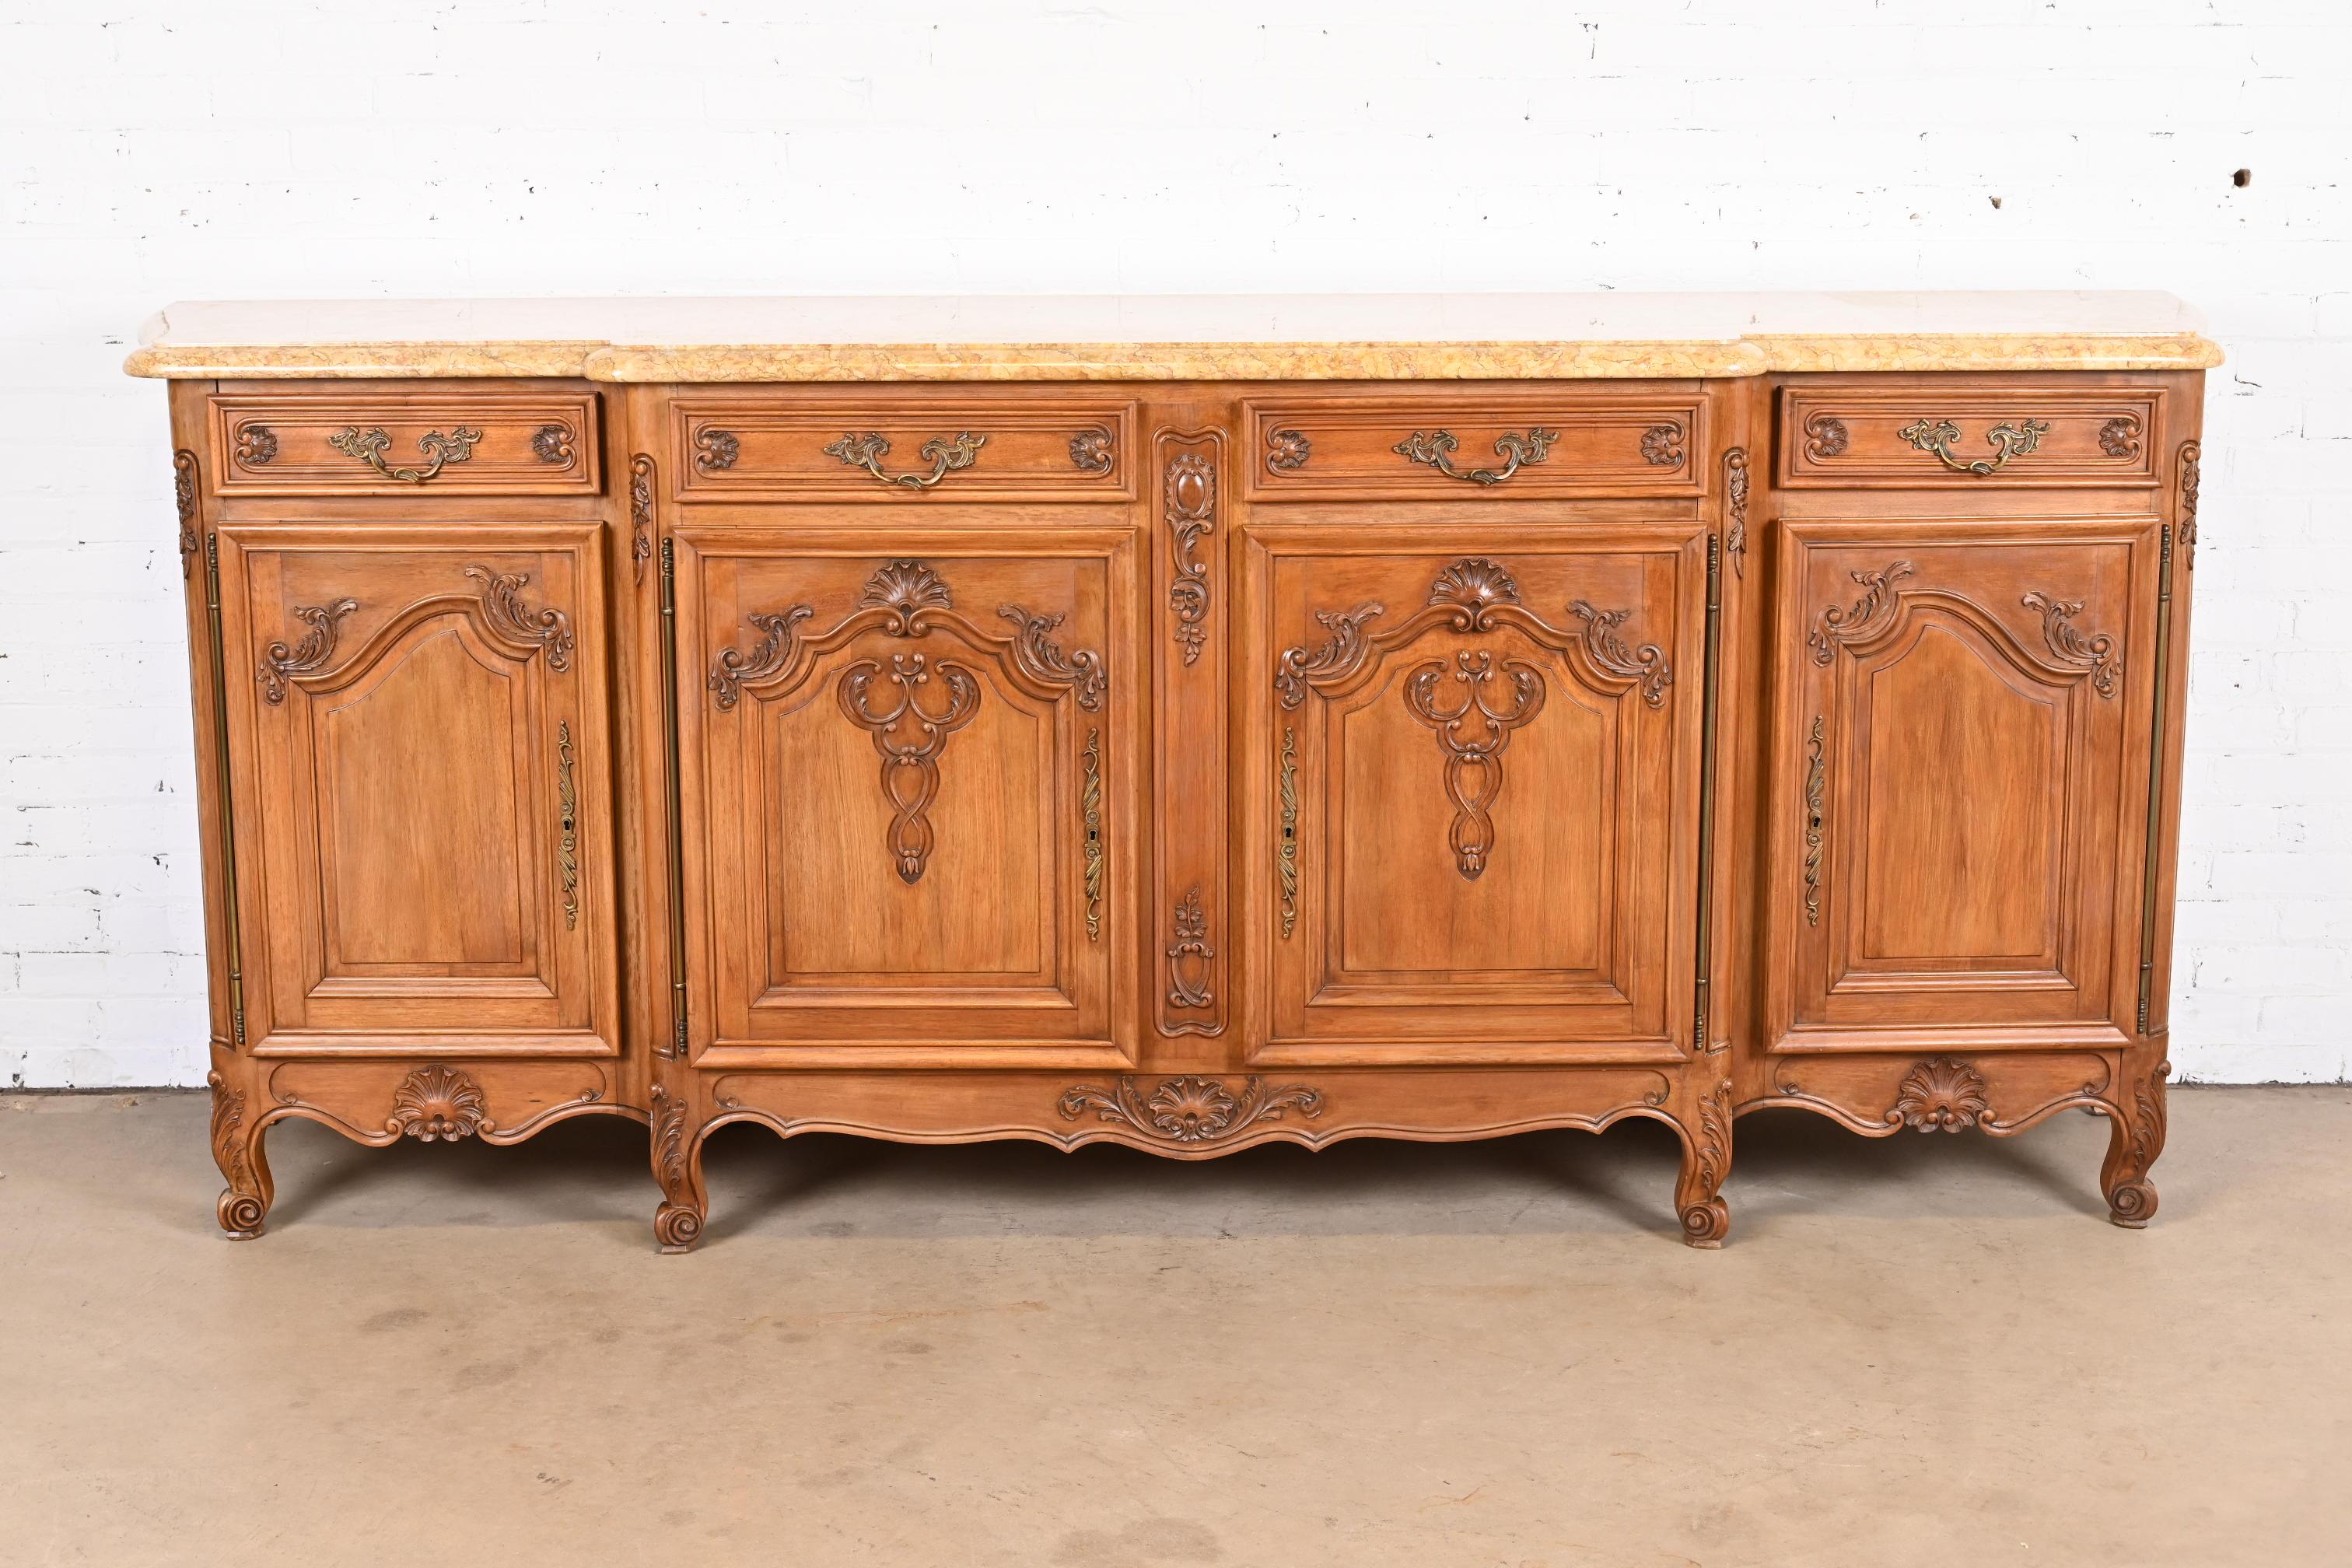 Antique Monumental French Provincial Louis XV Carved Walnut Marble Top Sideboard In Good Condition For Sale In South Bend, IN